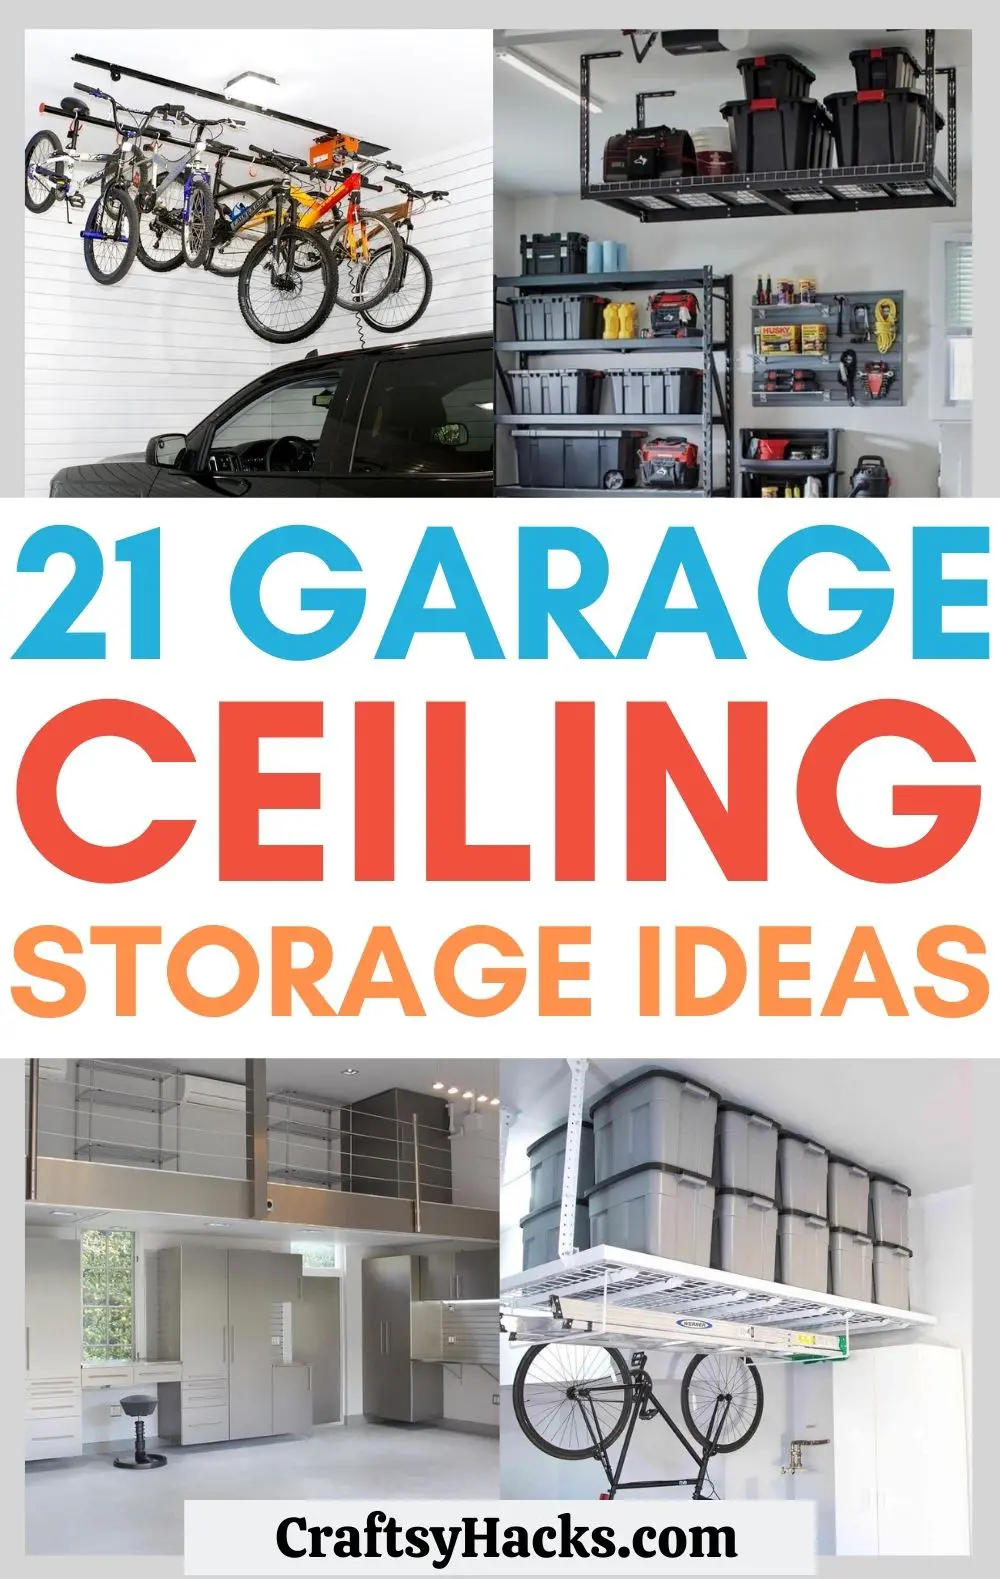 20 Garage Ceiling Storage Ideas to Save You Space   Craftsy Hacks